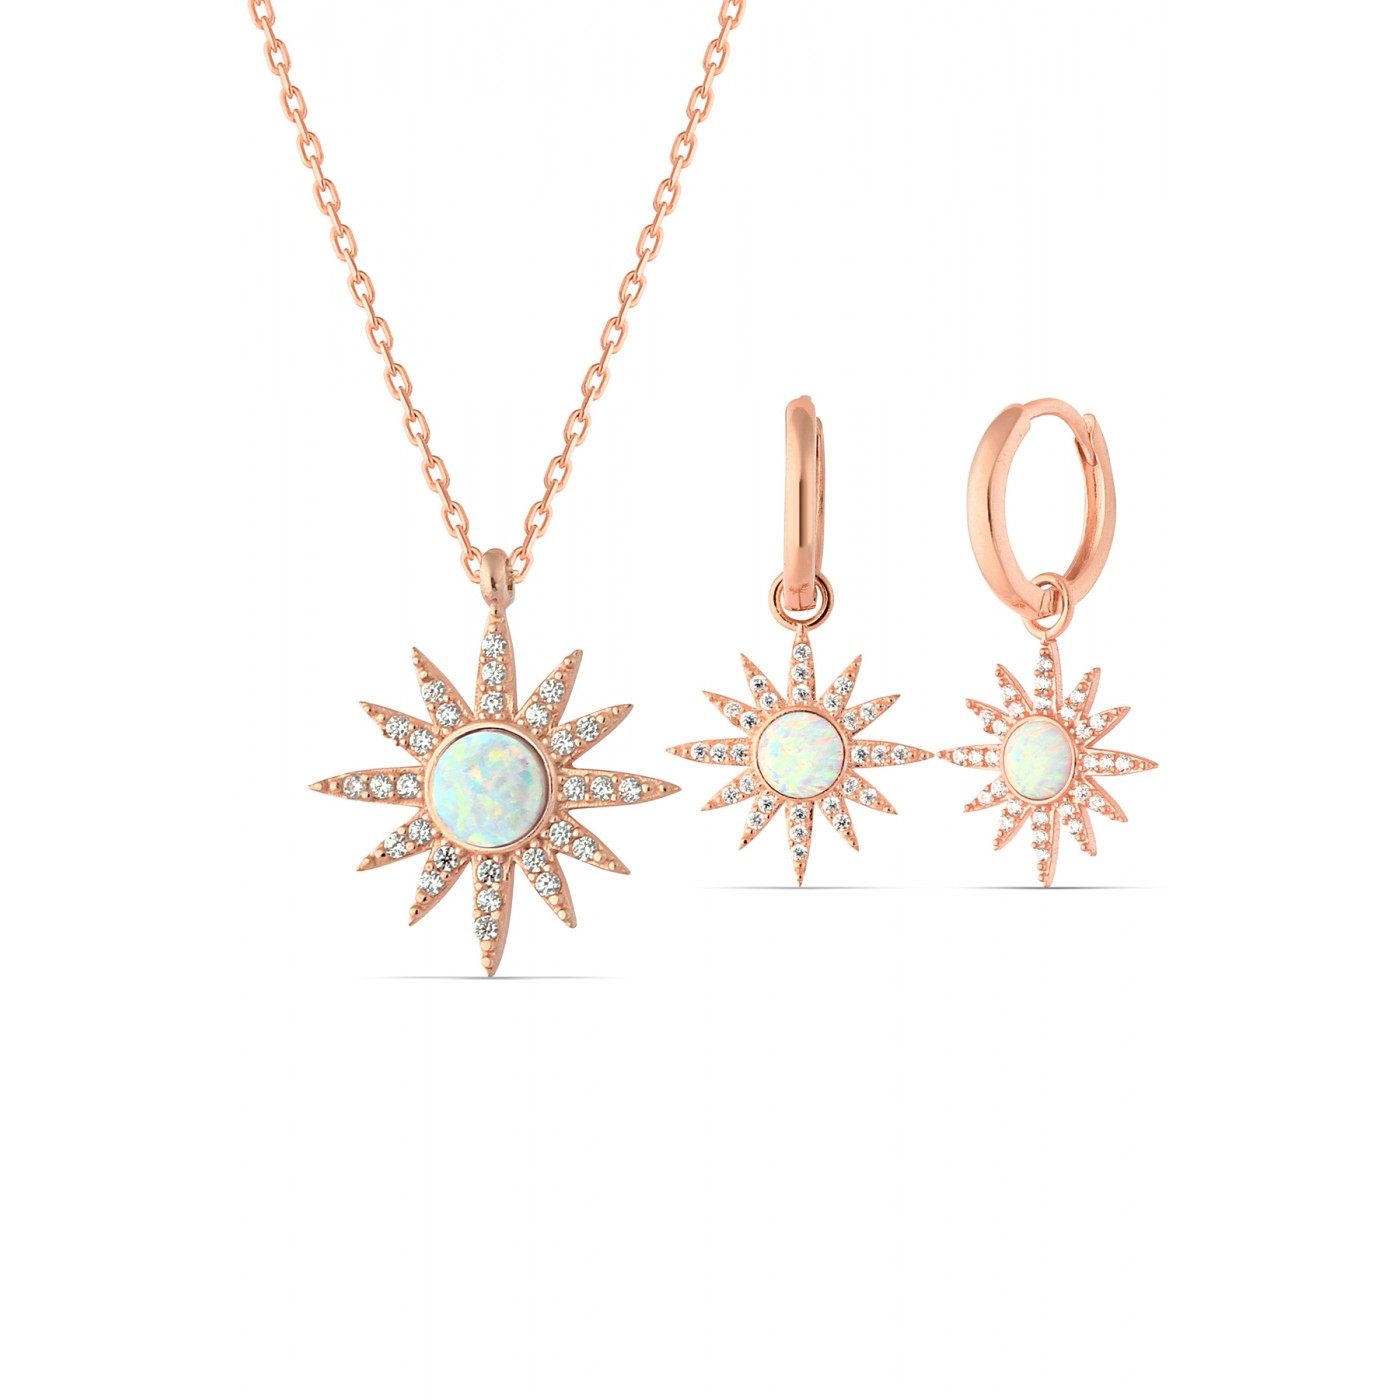 White Opal Sun Sterling Silver Necklace and Earring Set